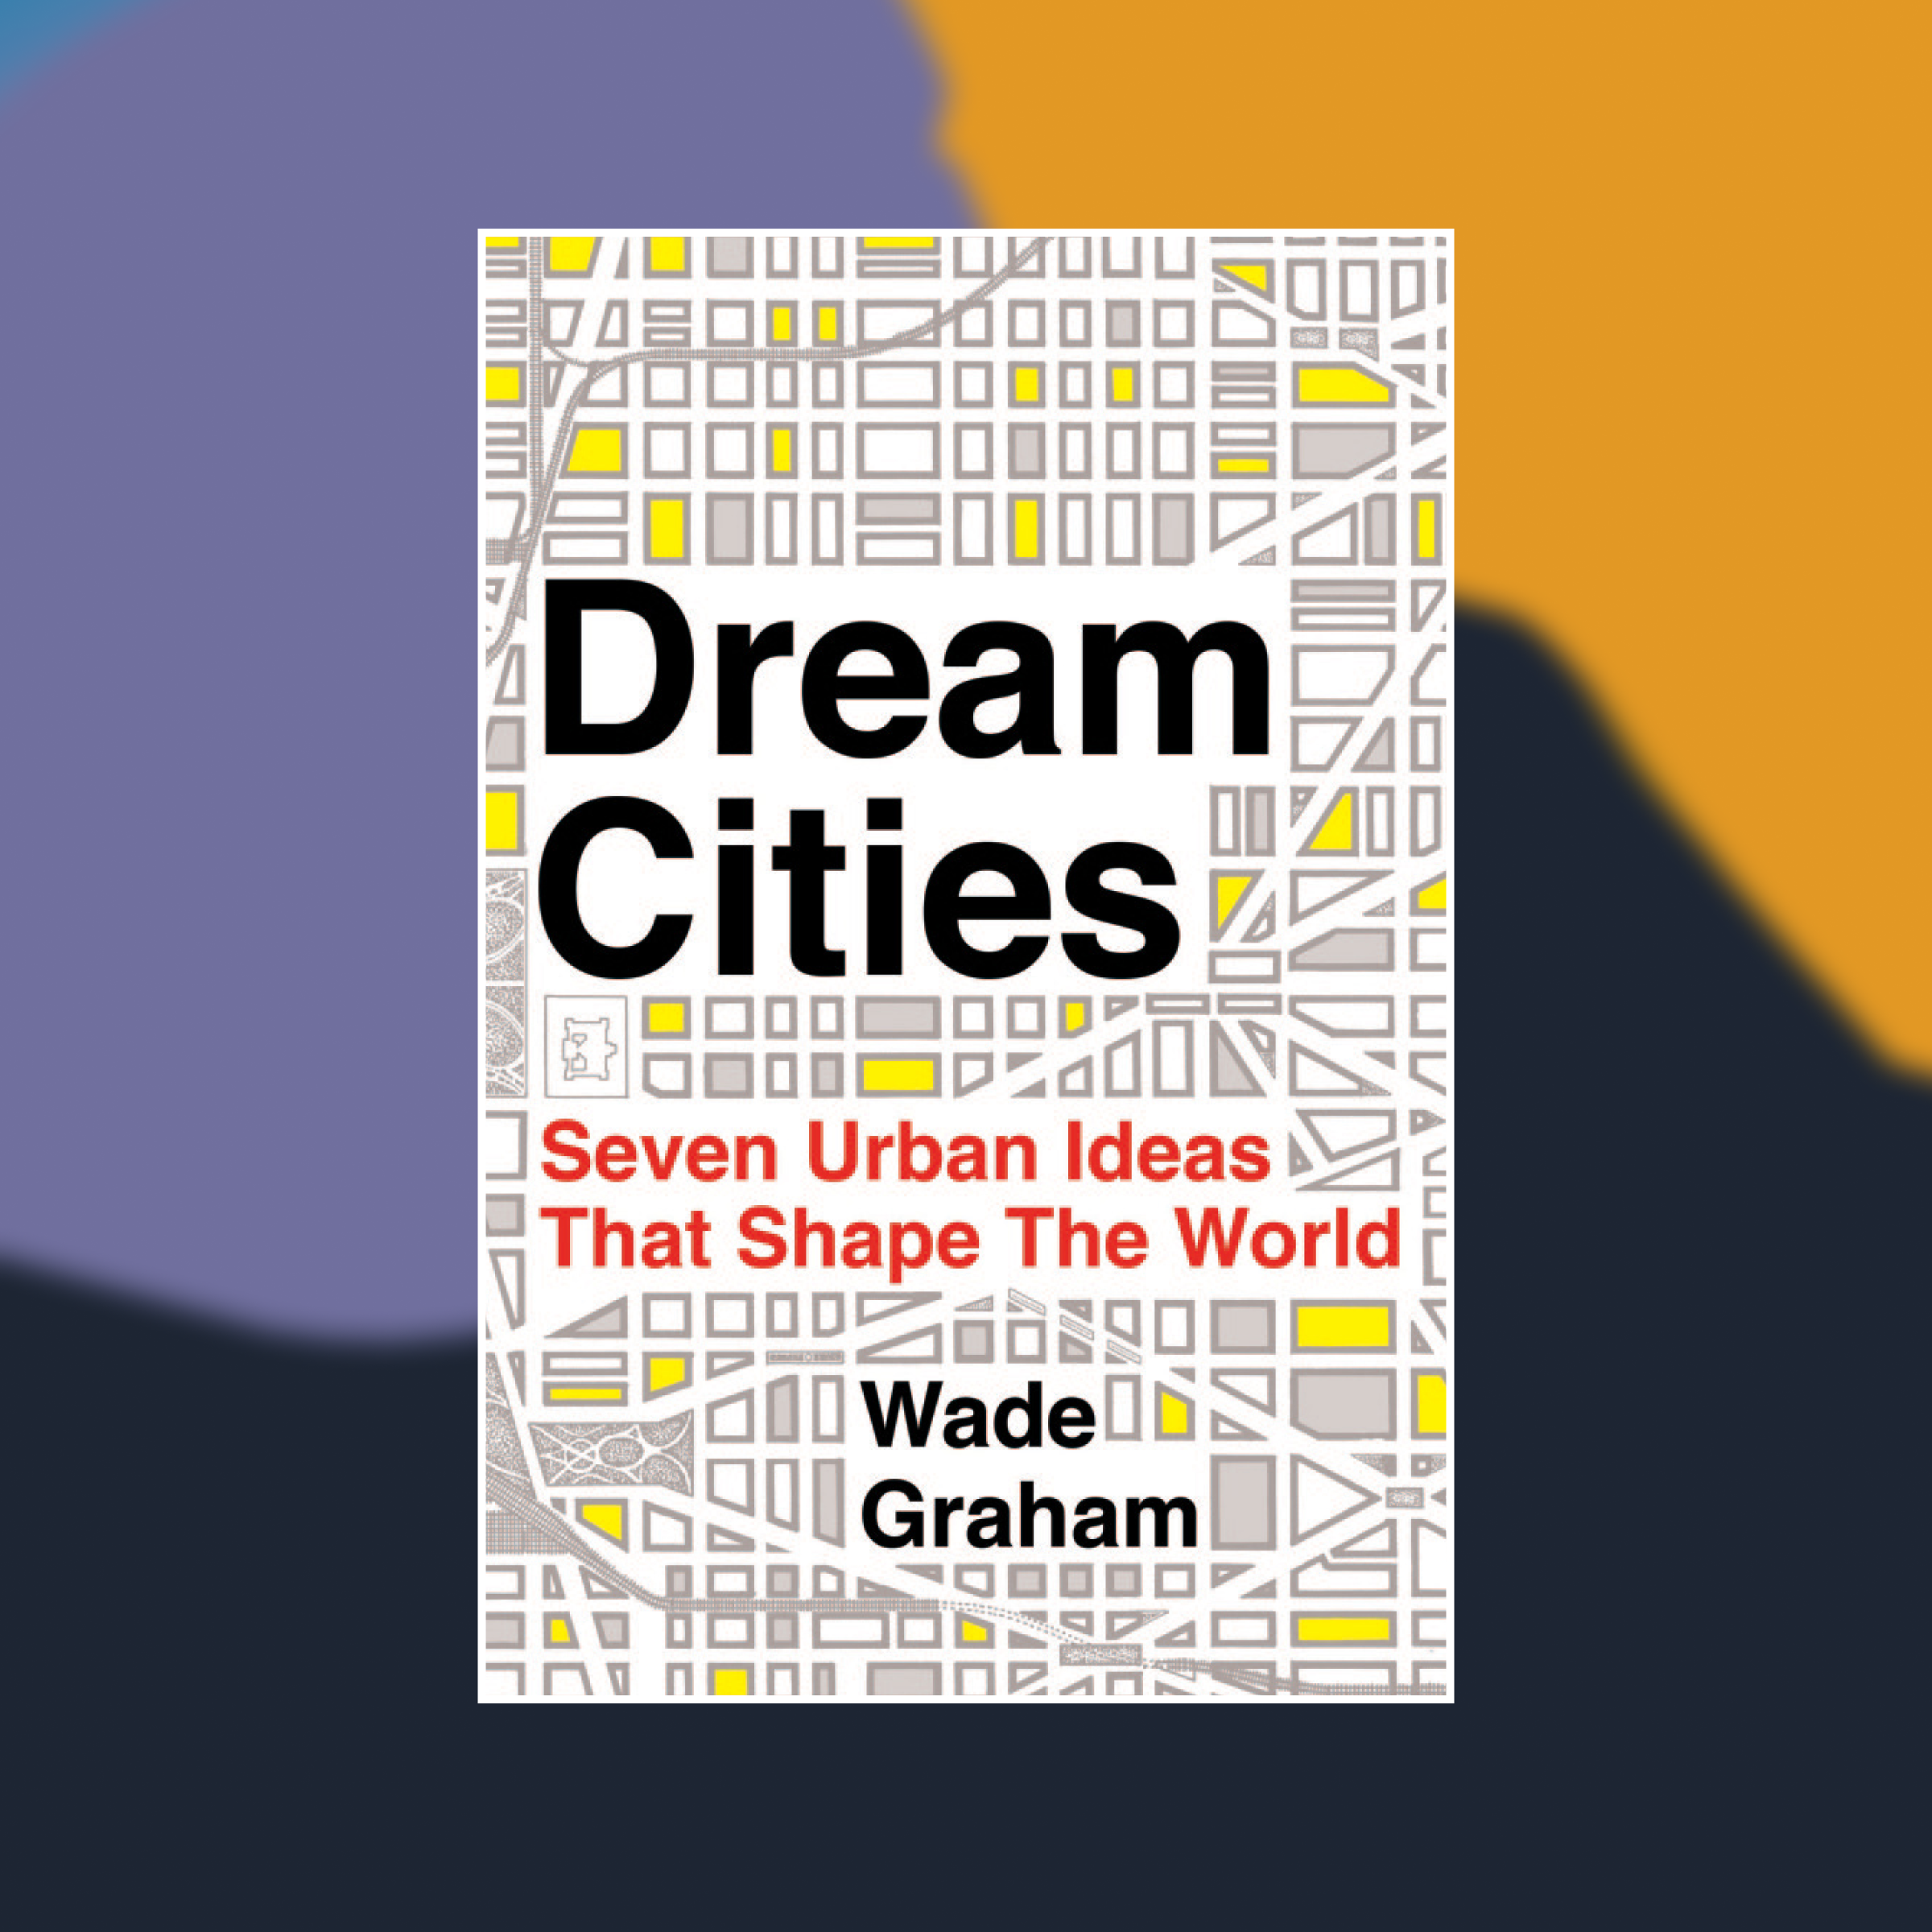 Book cover of Dream Cities against a painted background